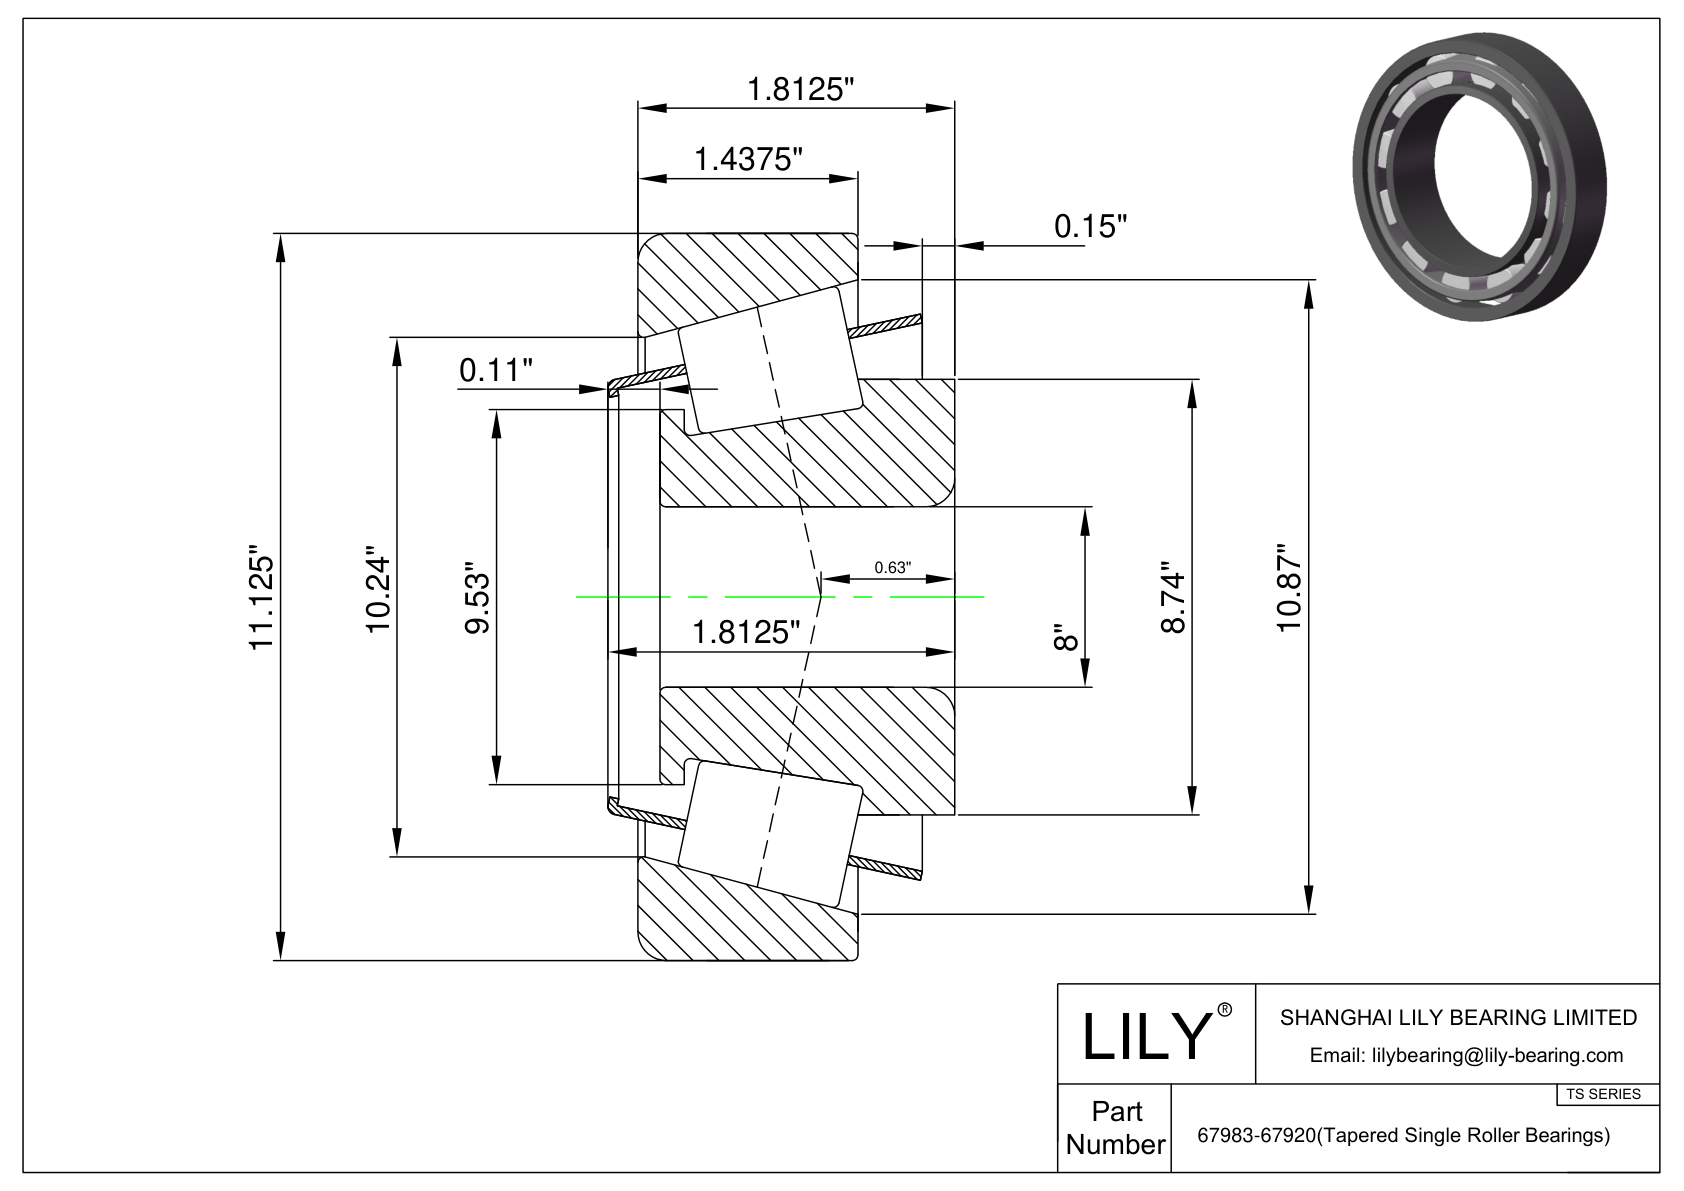 67983-67920 TS (Tapered Single Roller Bearings) (Imperial) cad drawing